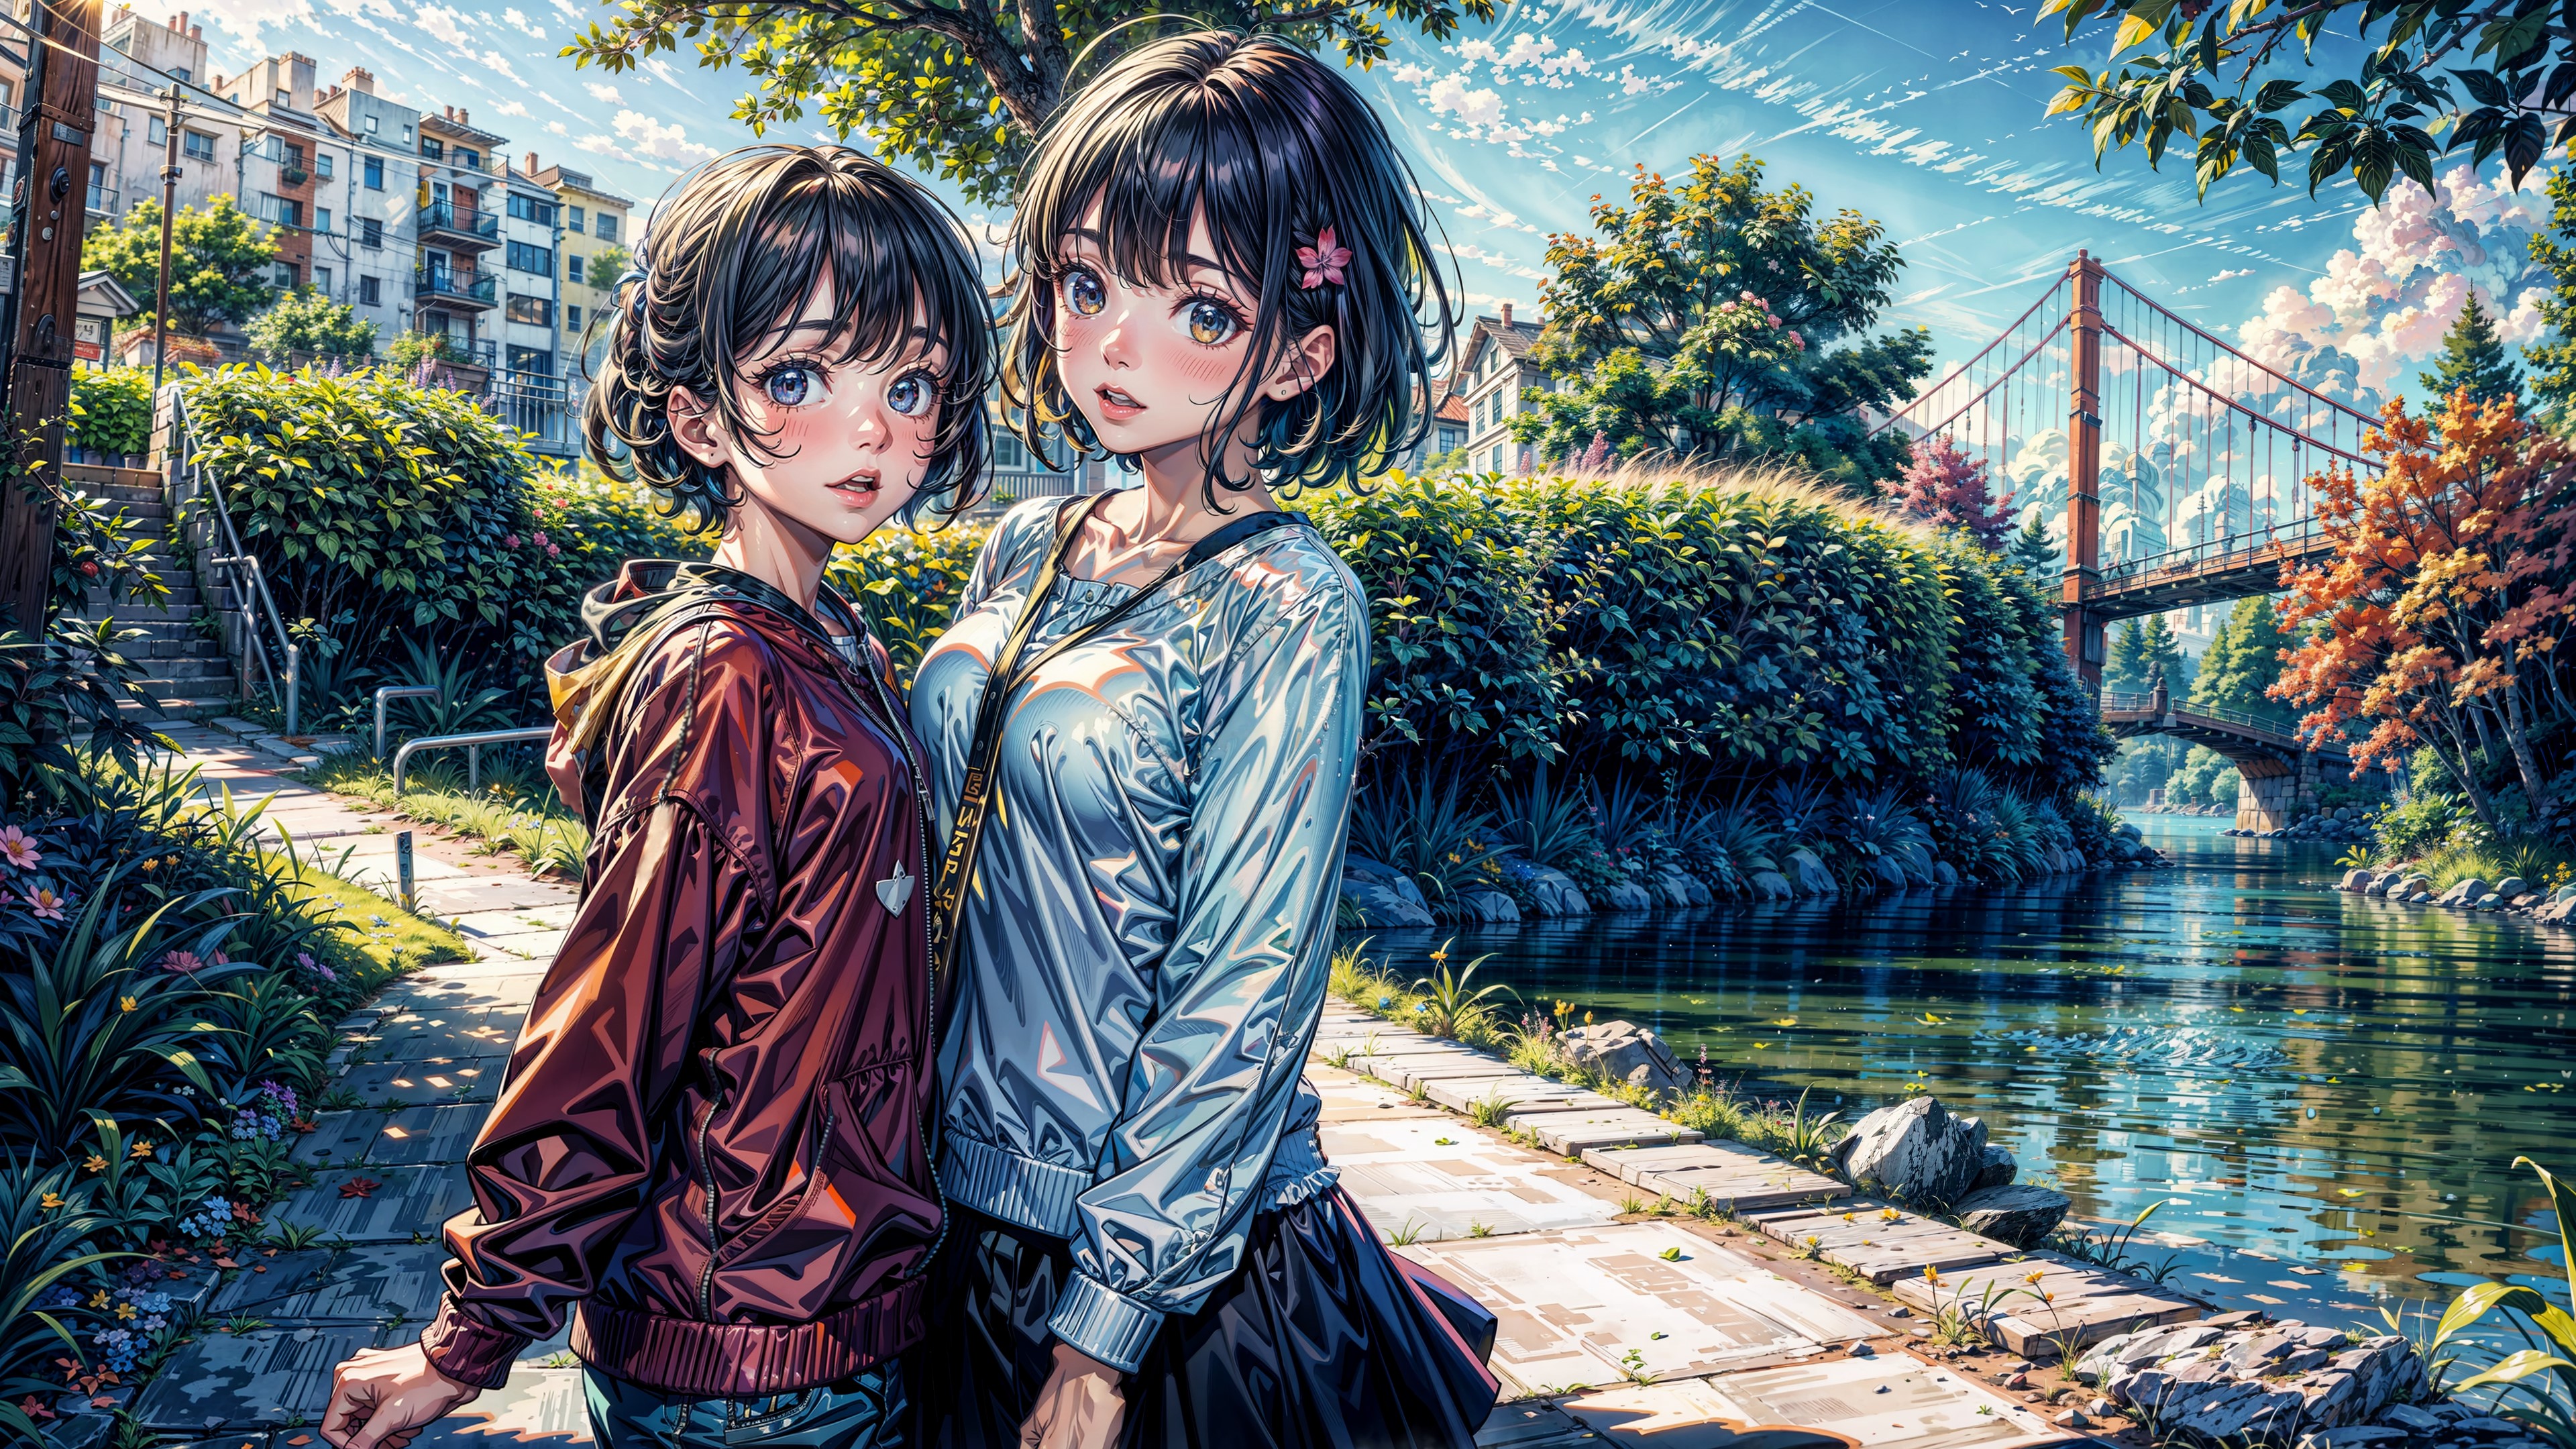 Anime 3840x2160 AI art standing looking at viewer nature river city bushes trees short hair blue eyes hazel eyes comforting idyllic friendship anime girls 4K Stable Diffusion photopea DeviantArt water reflection bridge sky clouds flower in hair stairs flowers leaves sunlight building